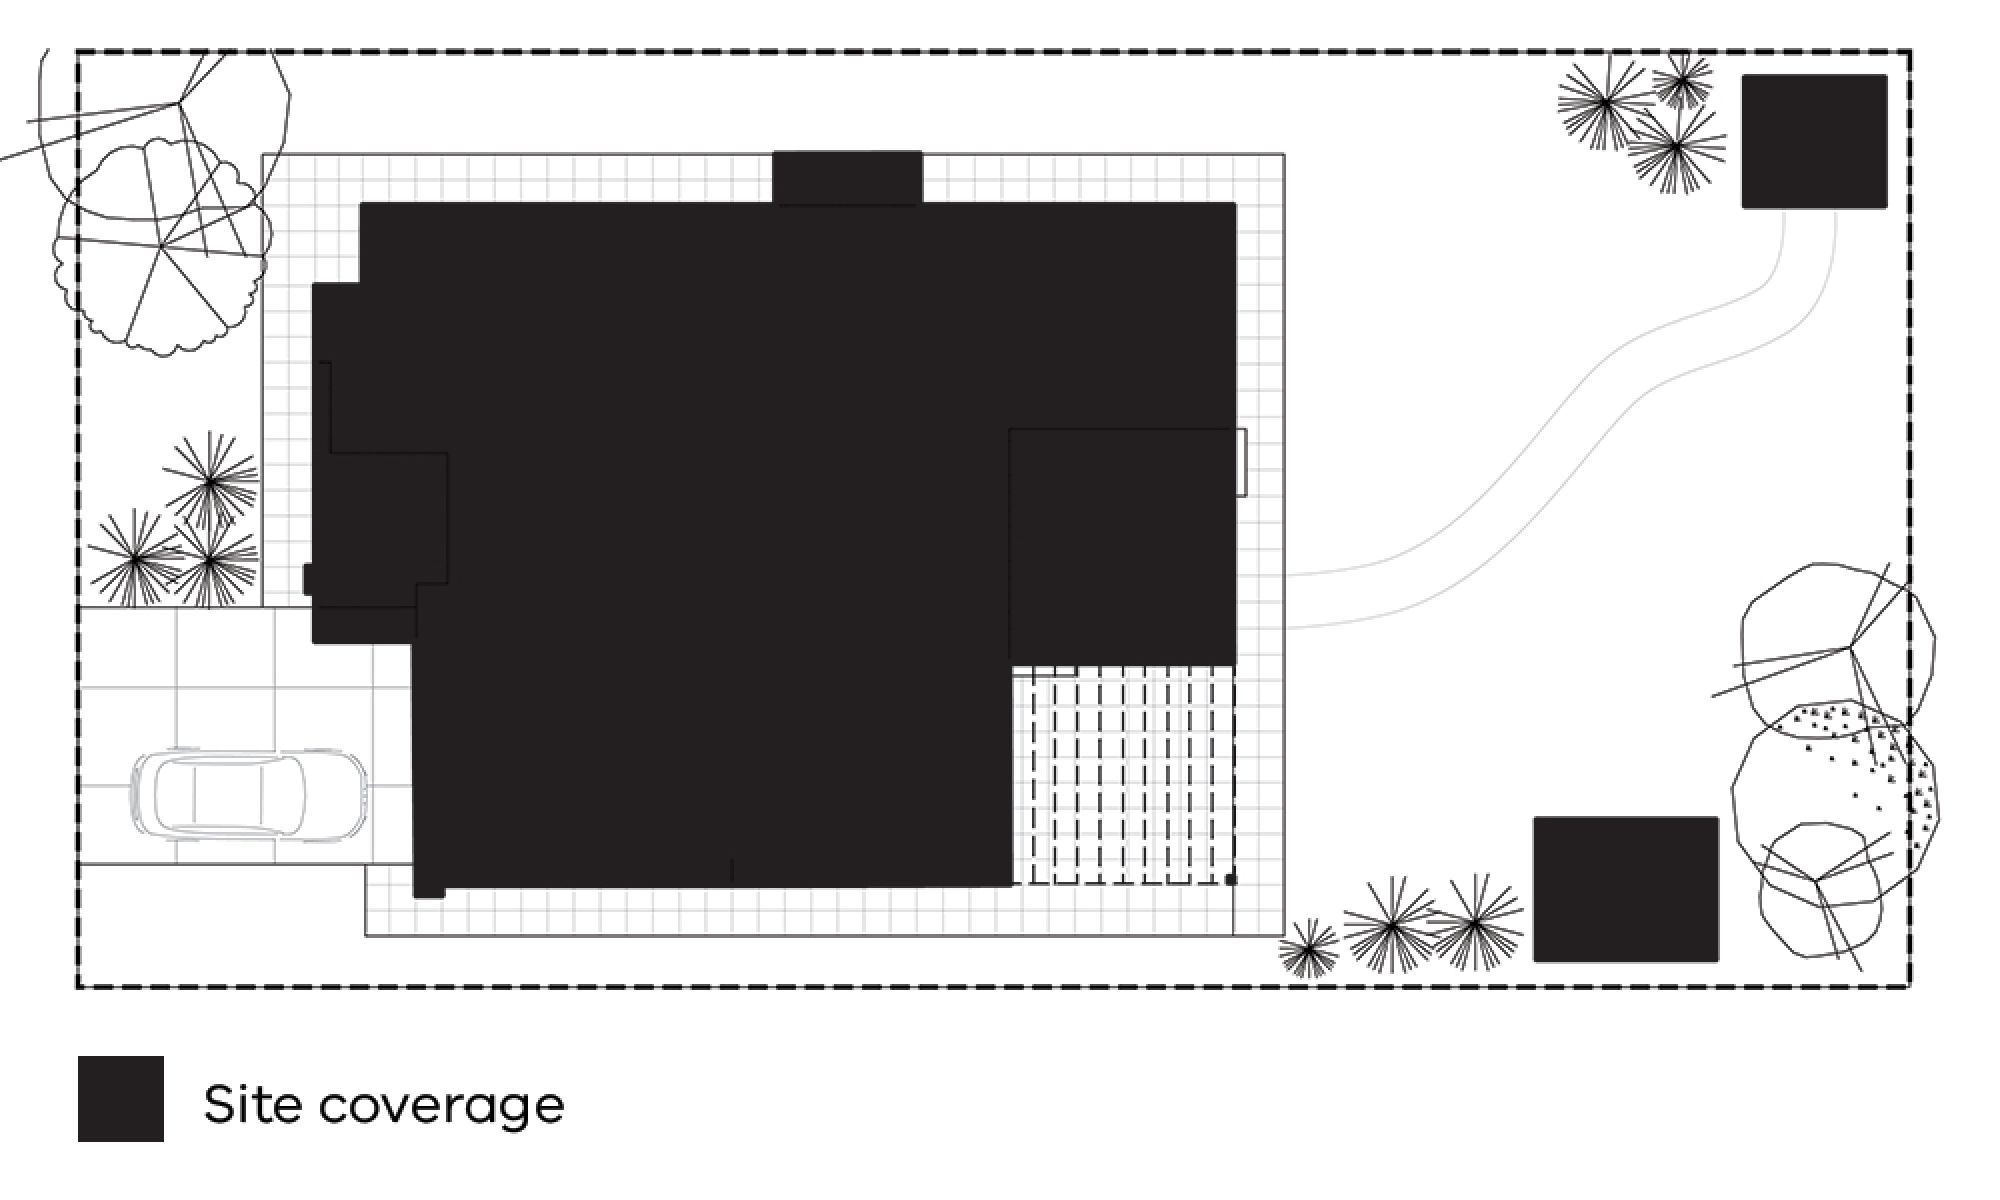 Plan showing location of roofed areas of: house, garden shed and barbecue area within the context of the driveway, ground areas covered by overhang from eaves, pack patio or deck and garden.